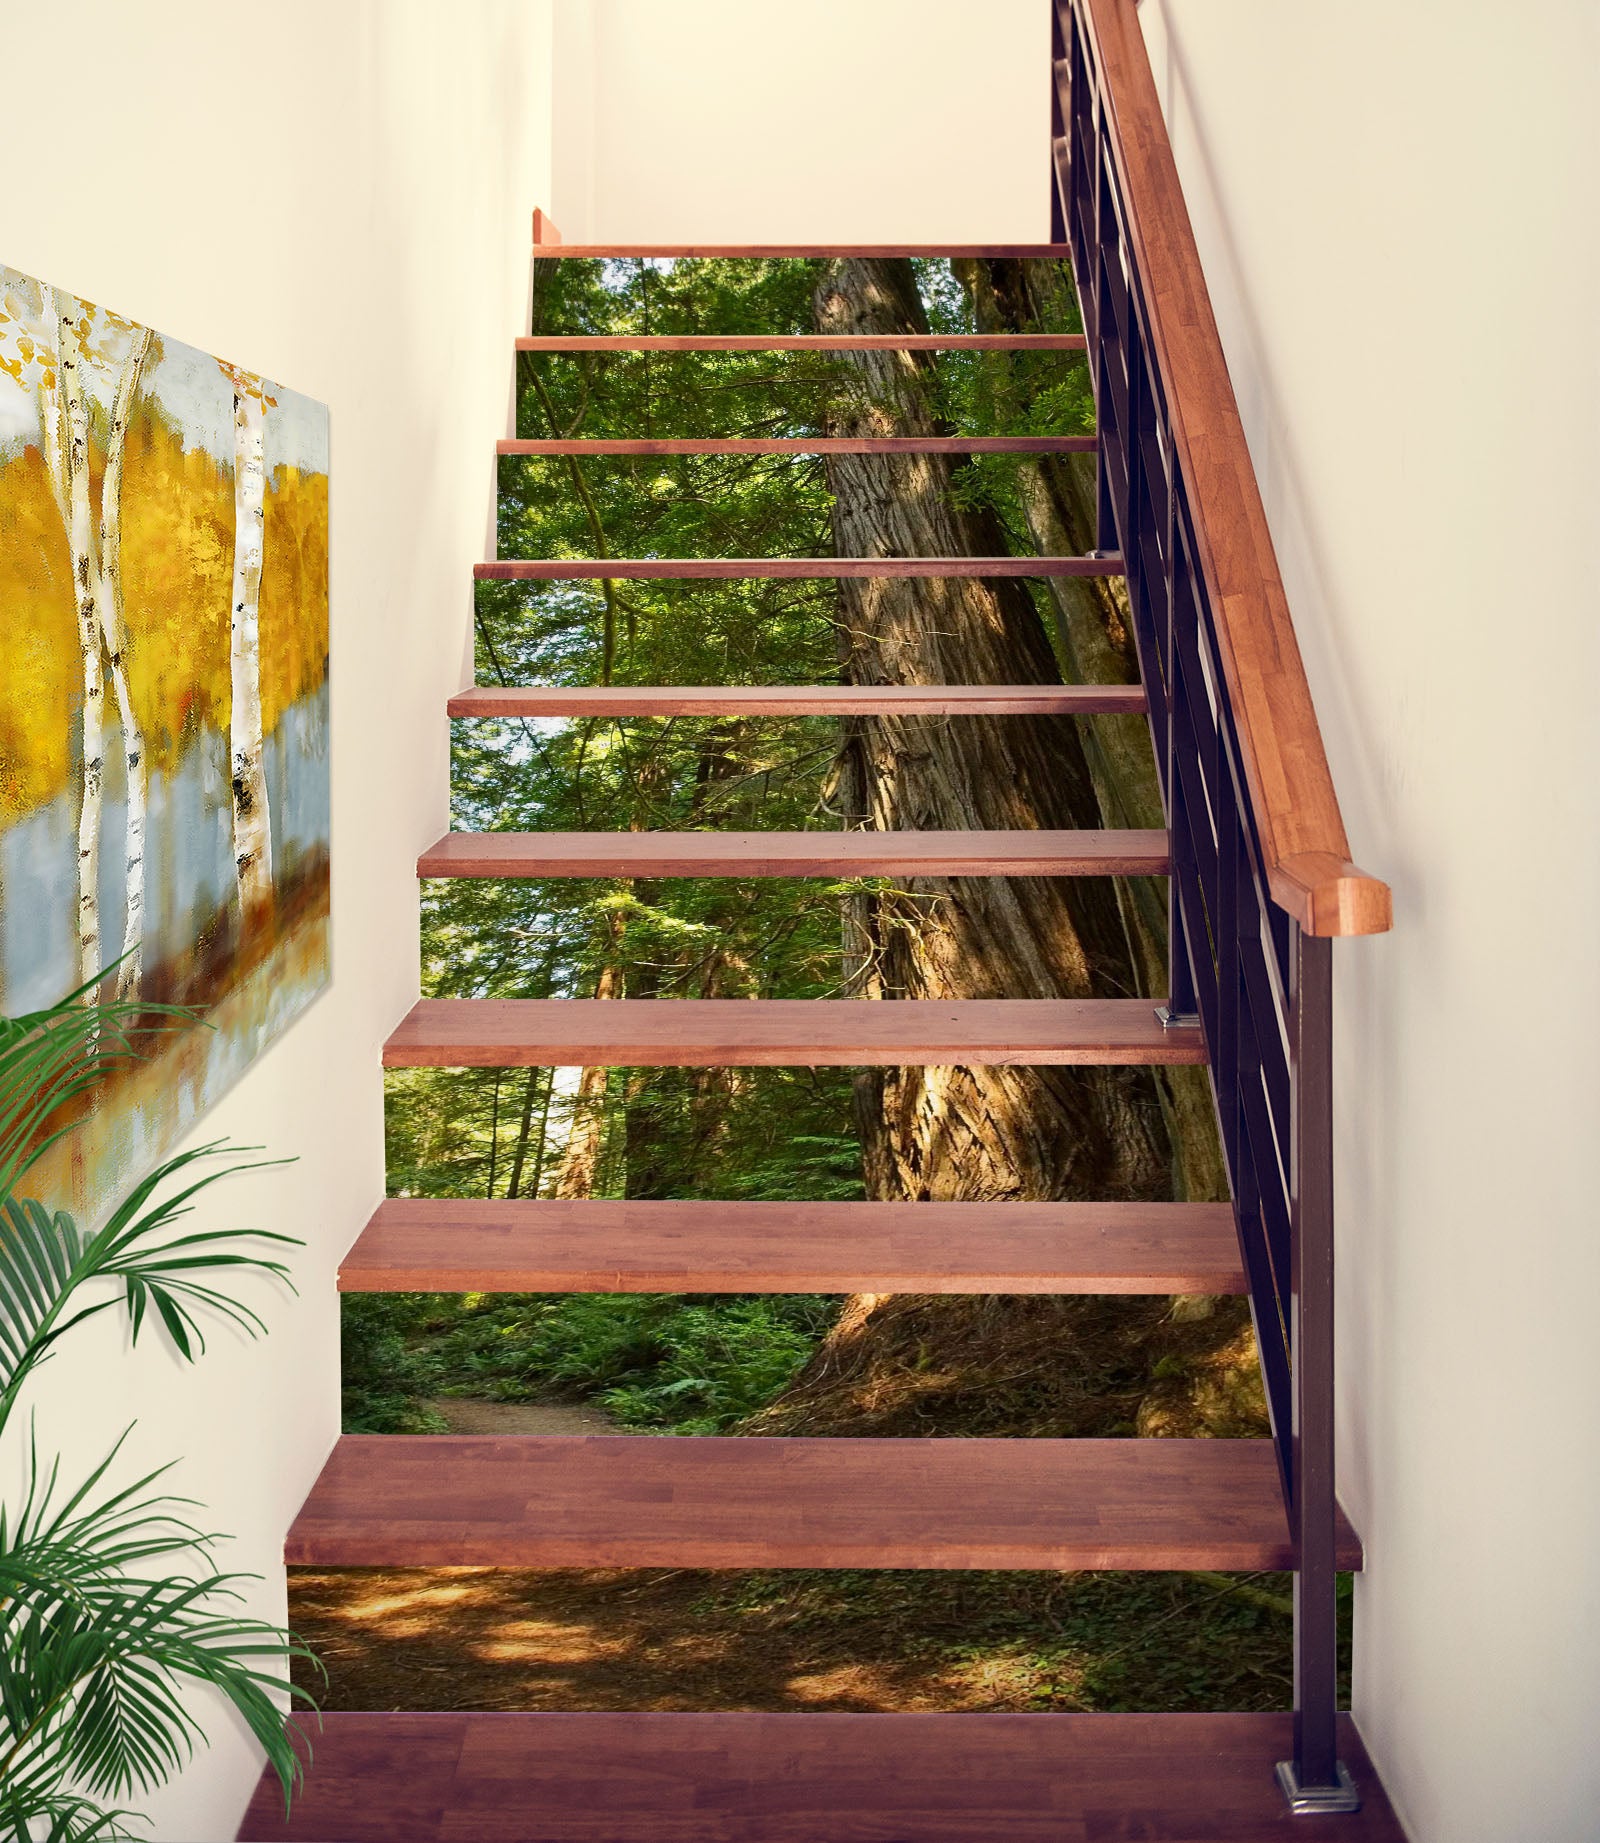 3D Forest 9902 Kathy Barefield Stair Risers